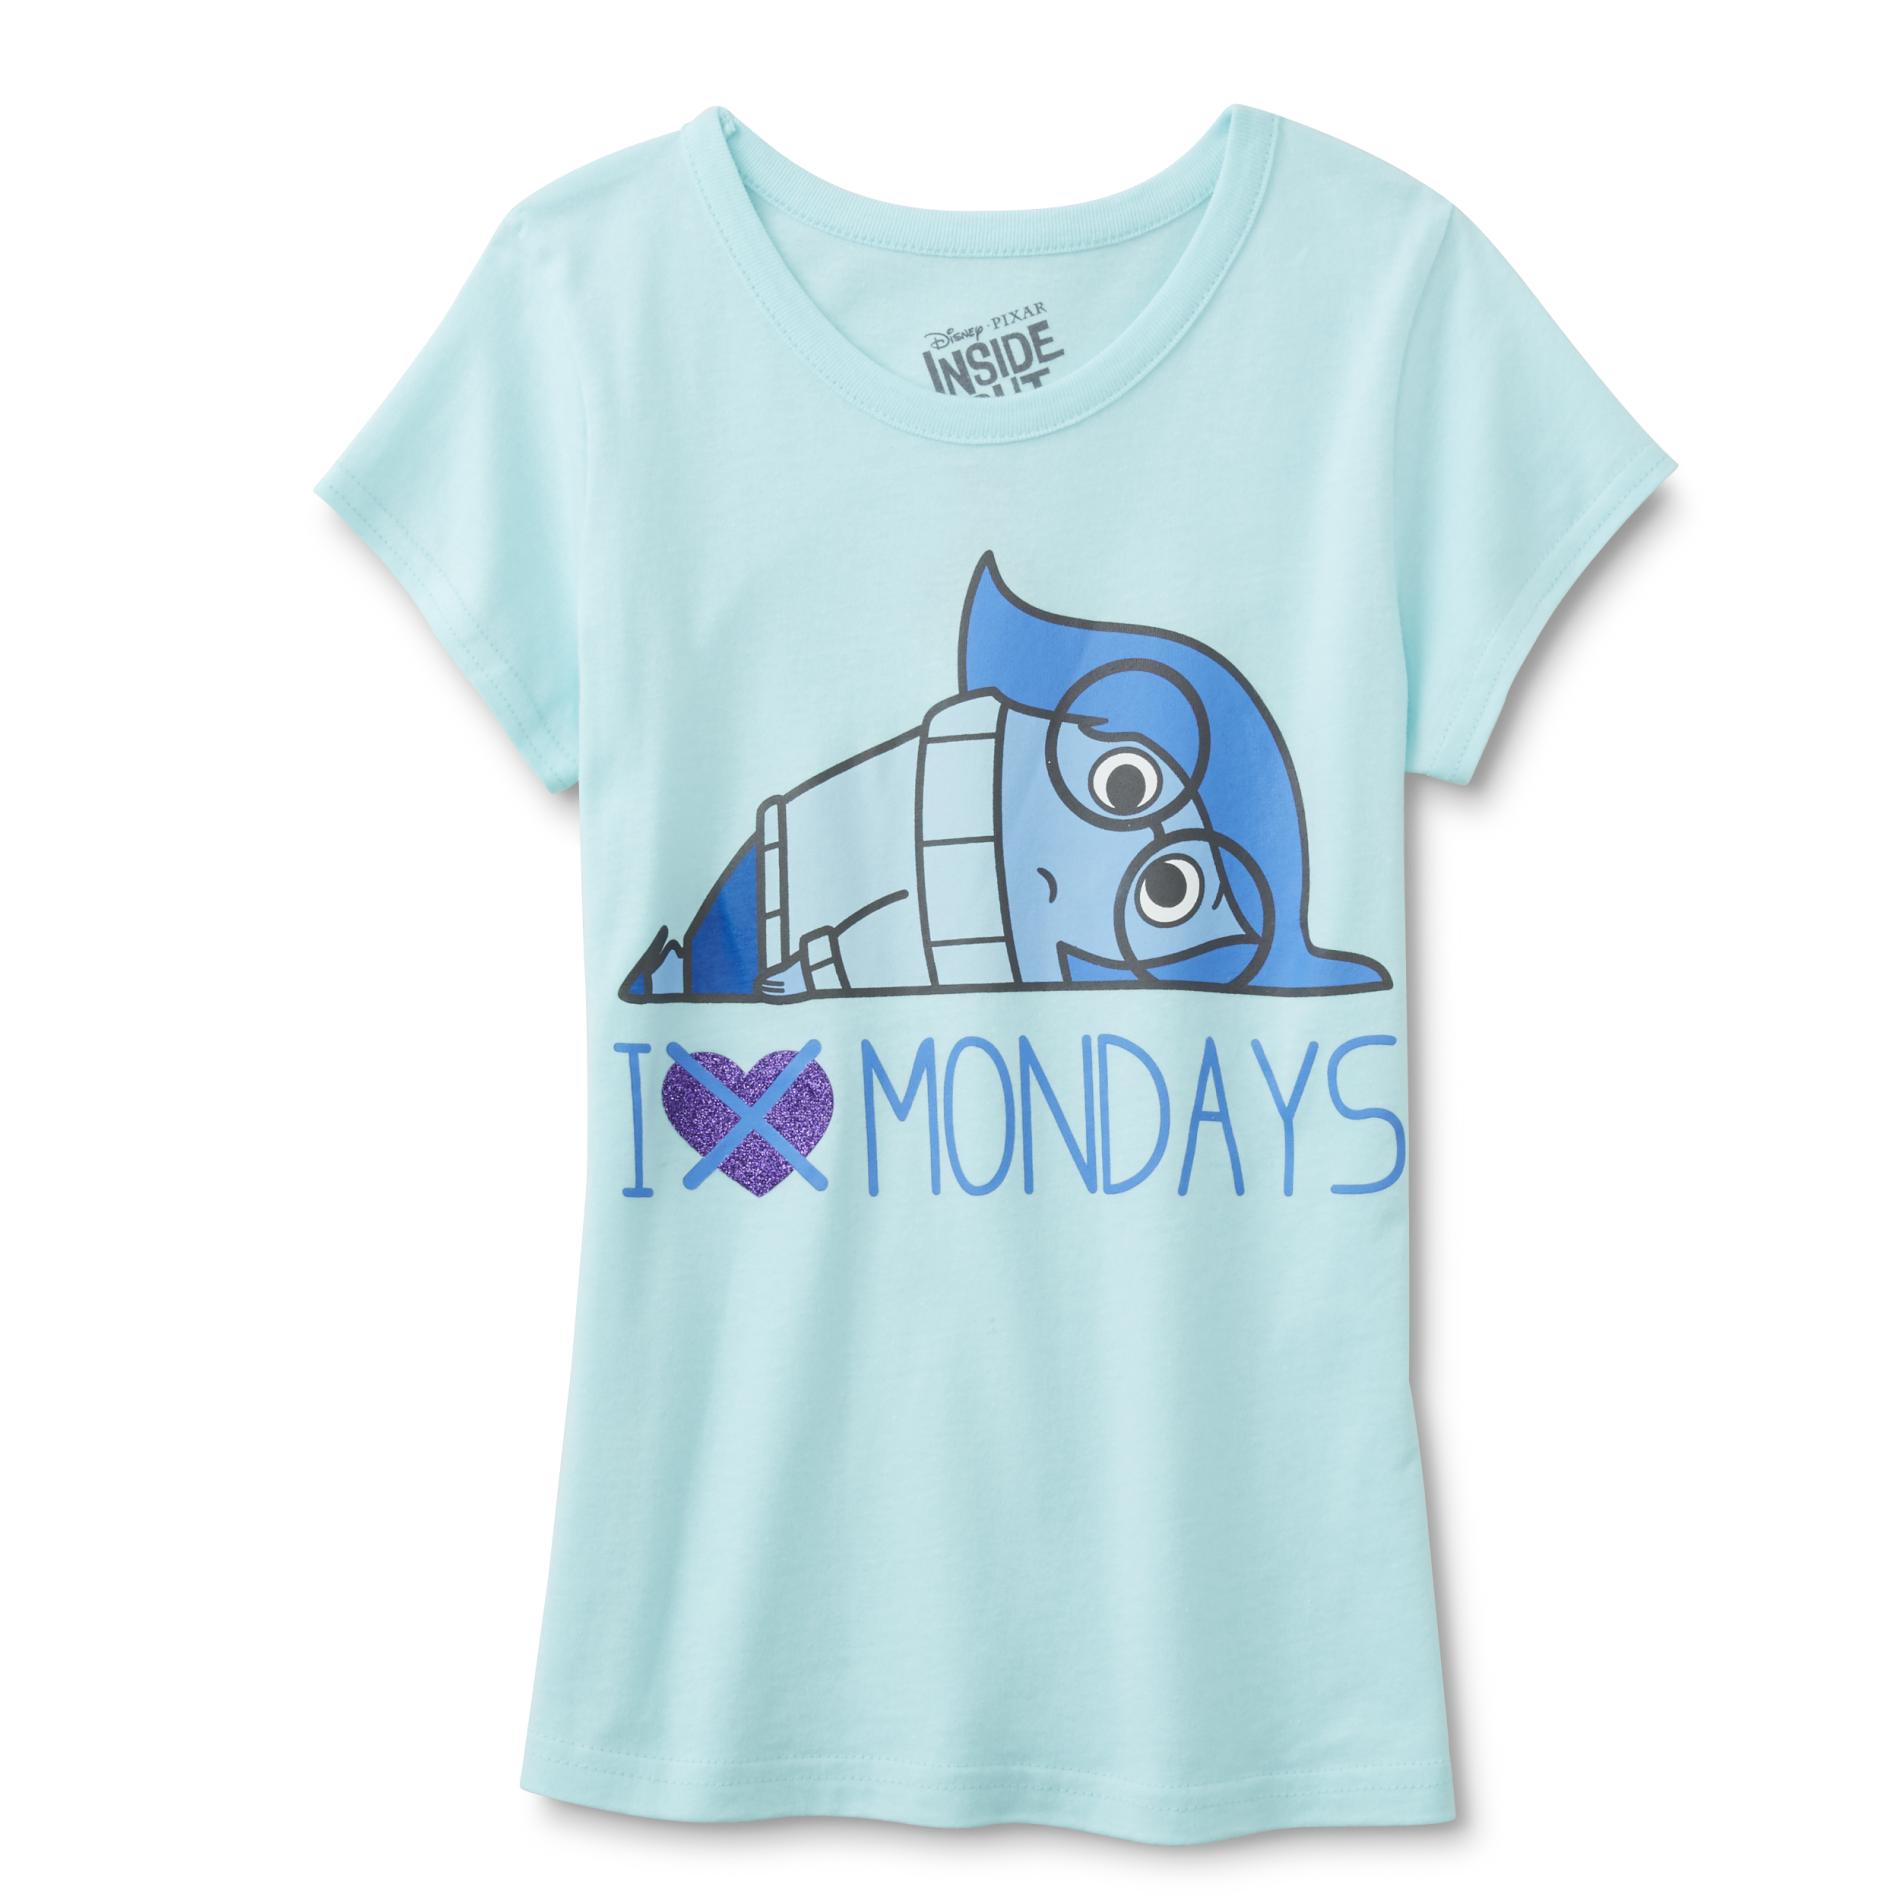 Disney Inside Out Girl's Graphic T-Shirt - Sadness